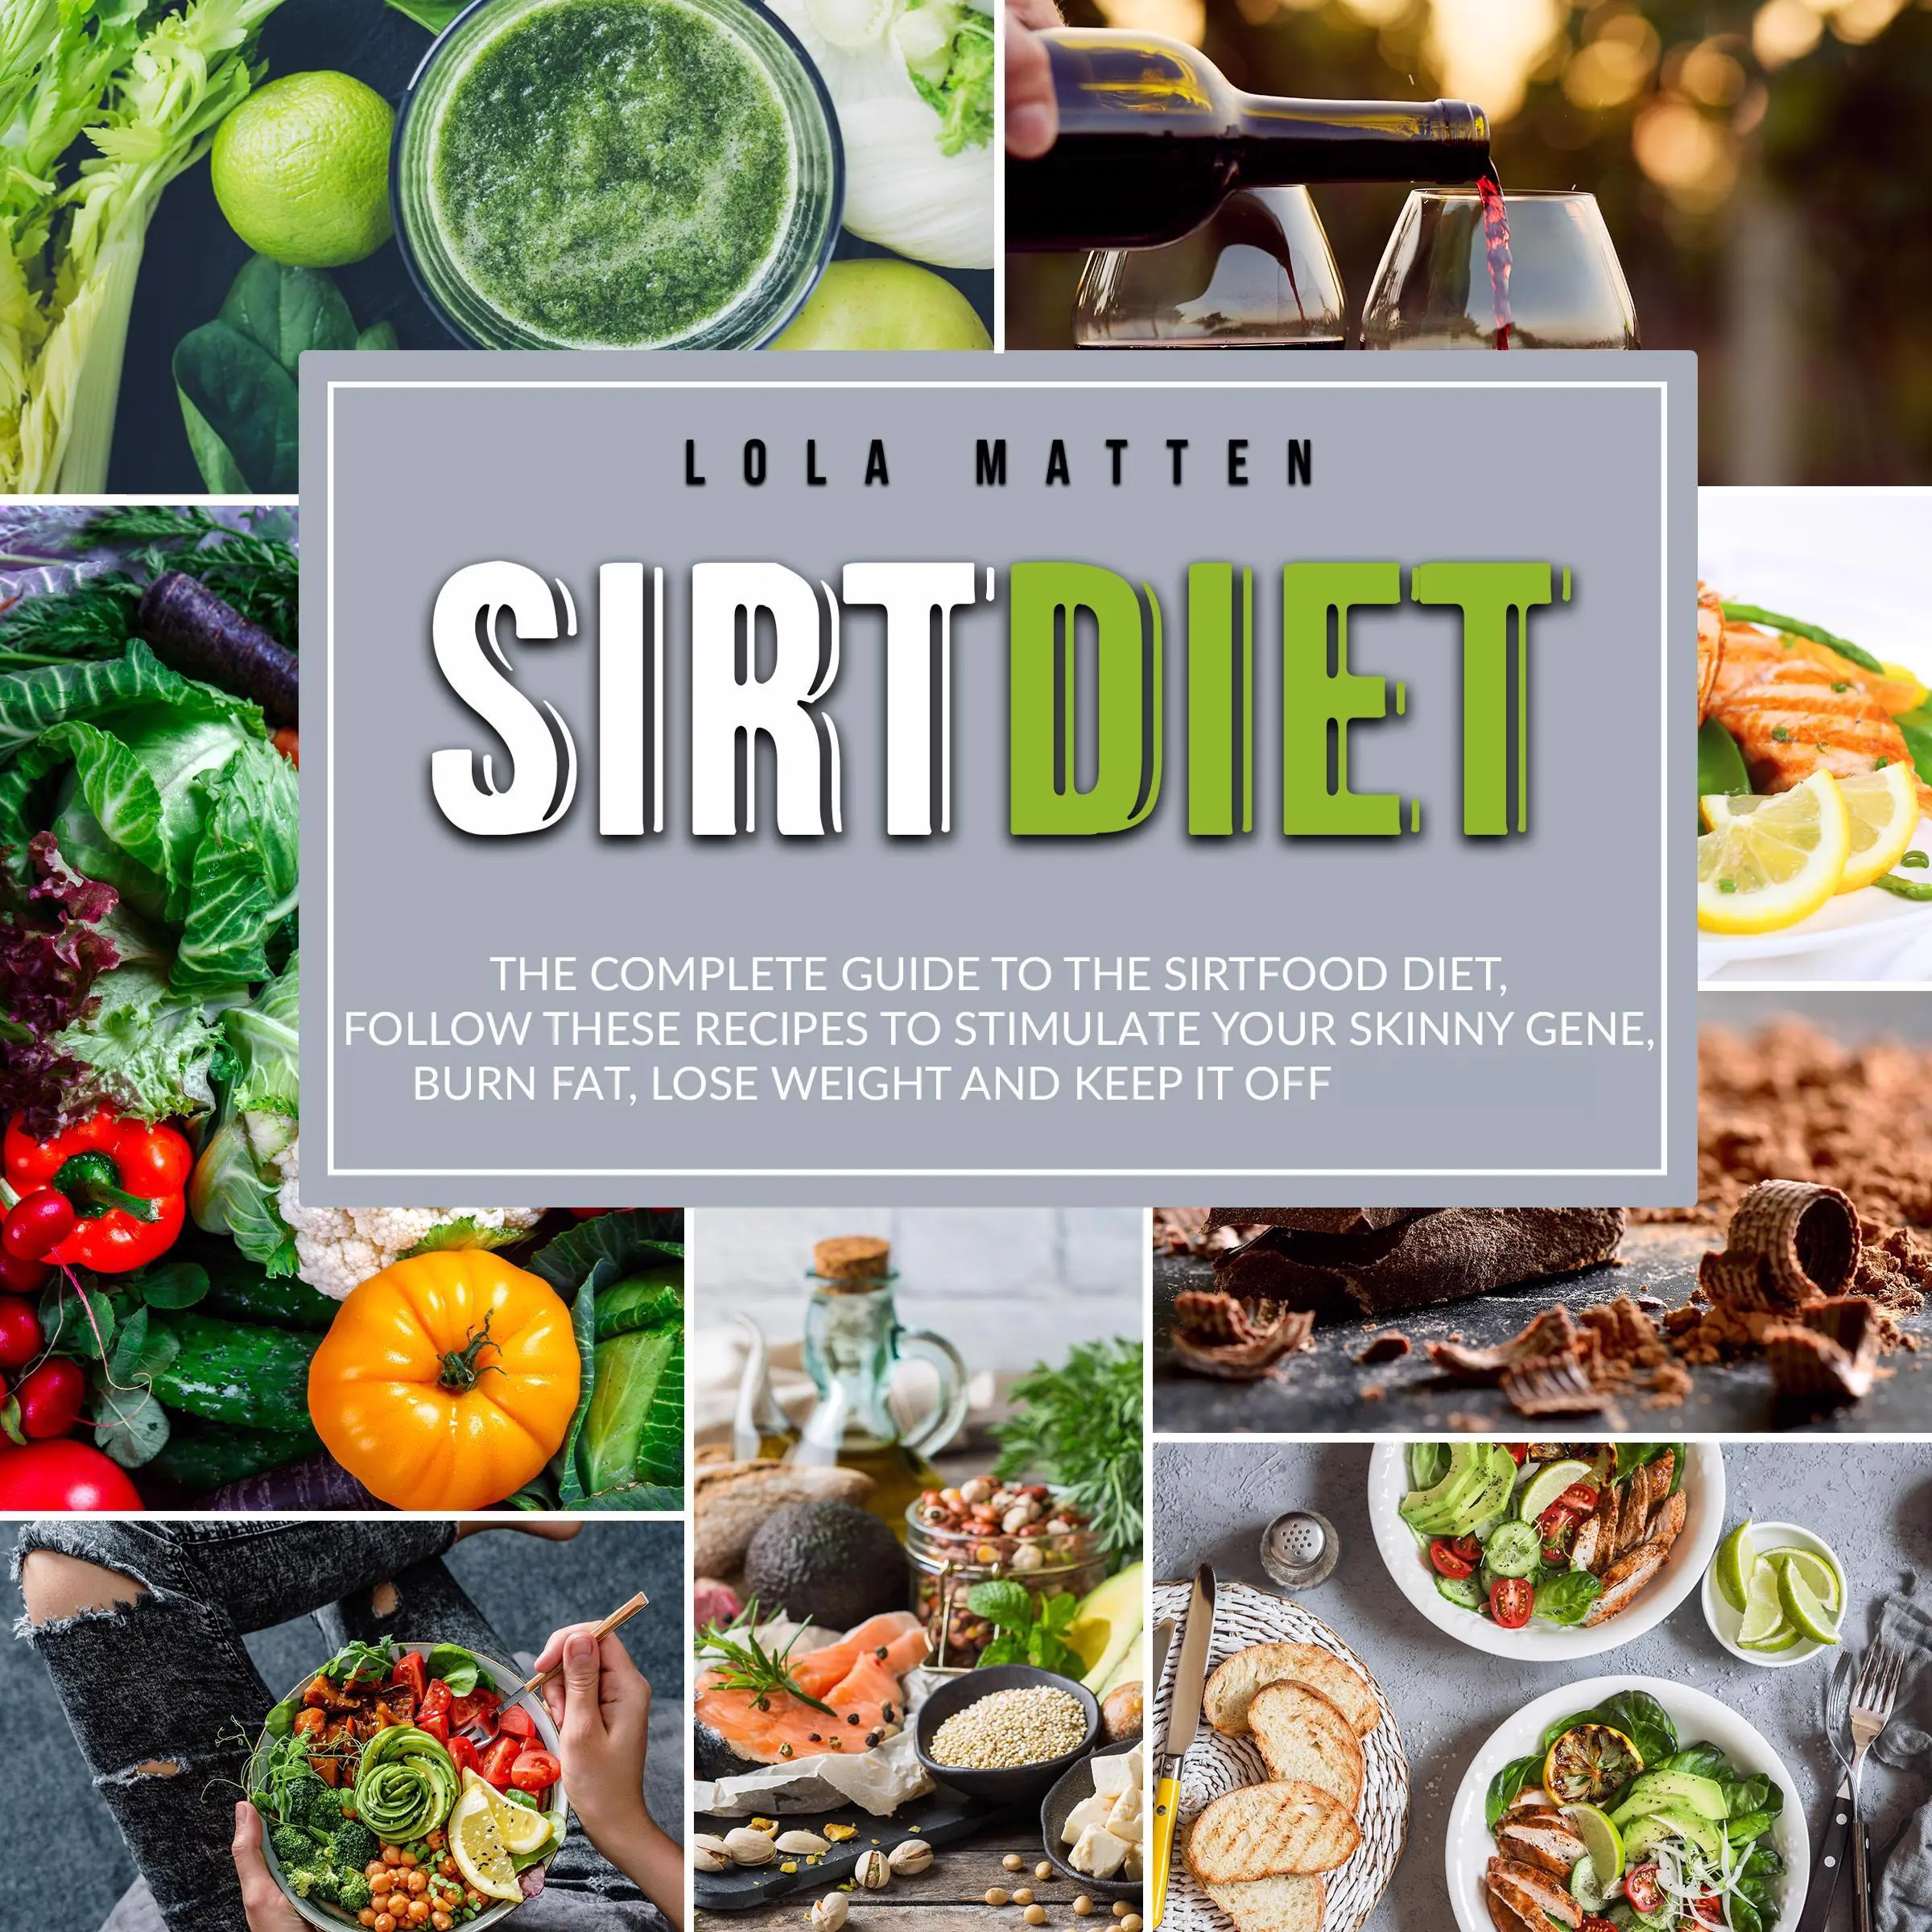 Sirt Diet: The Complete Guide to the Sirtfood Diet, follow these Recipes to stimulate your Skinny Gene, burn Fat, lose Weight and keep it off Audiobook by Lola Matten